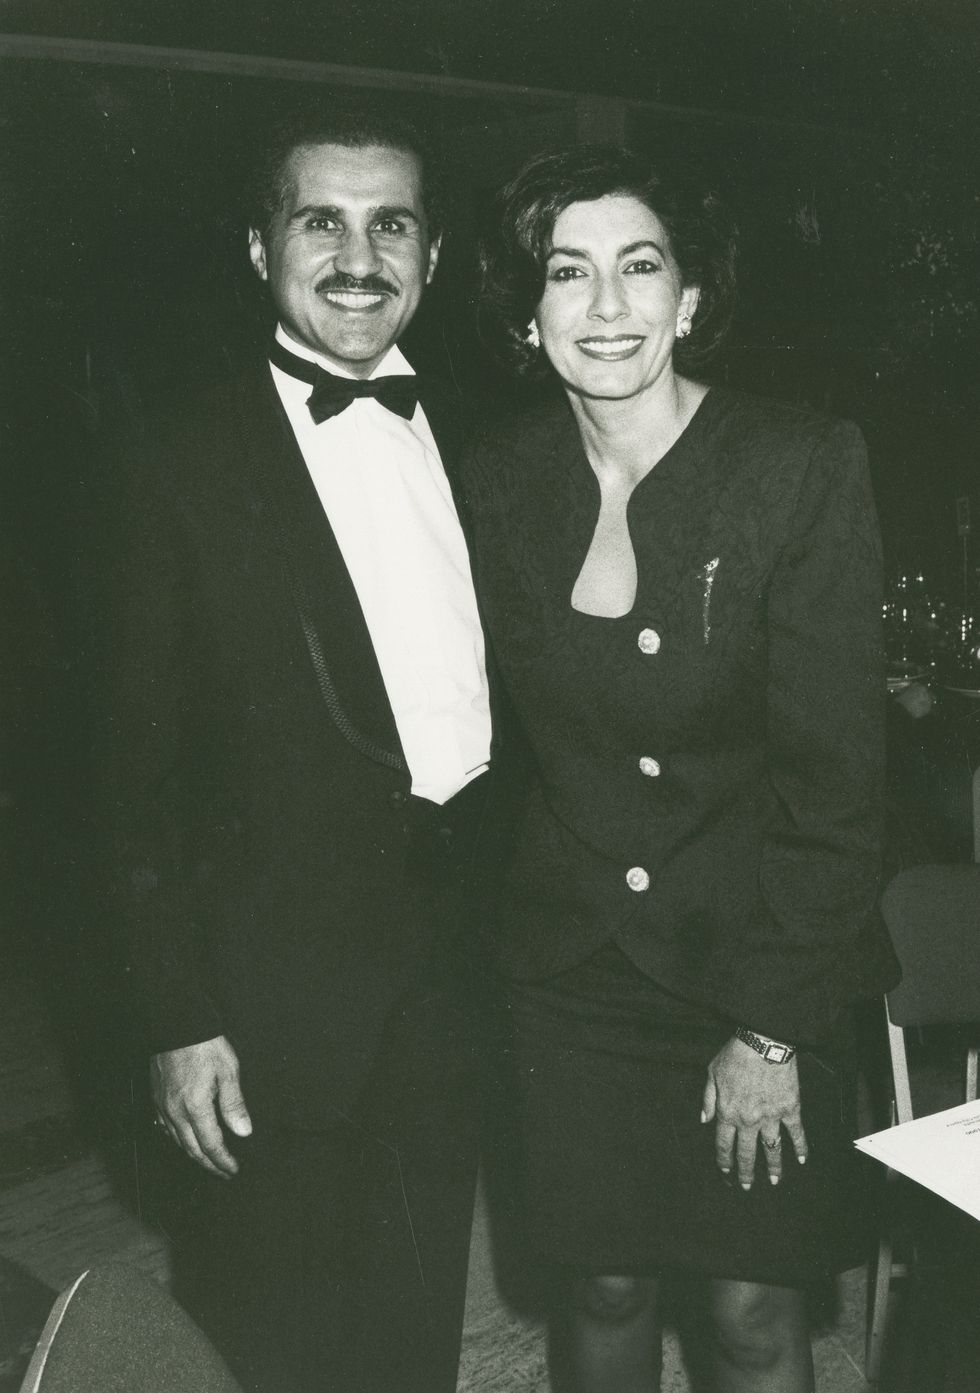 new york city   july 10  amr khashoggi and samira khashoggi attend the opening night of july 10, 1990 at lincoln center in new york city photo by ron galellaron galella collection via getty images